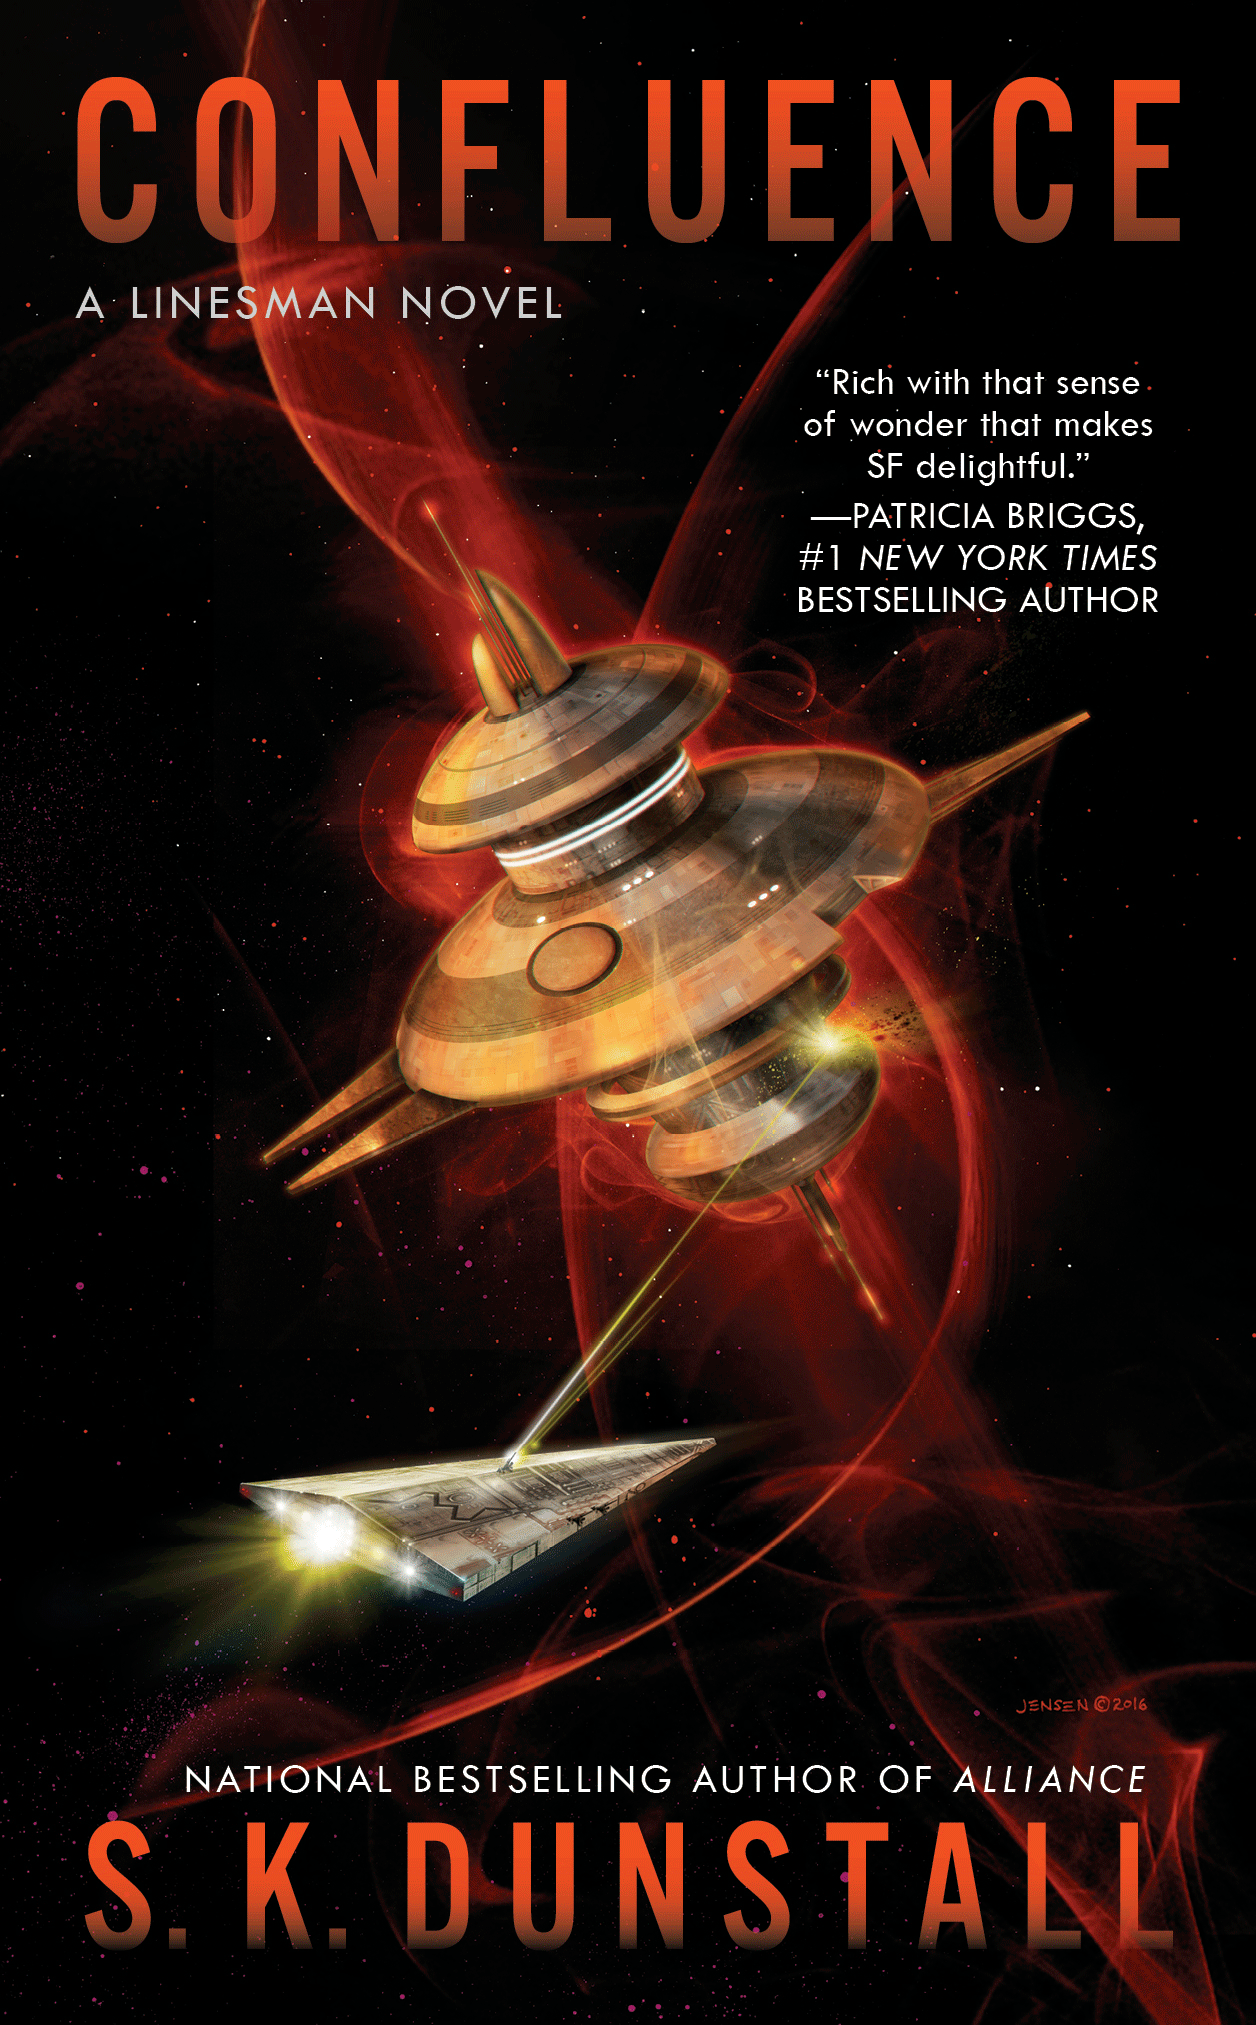 The cover for Confluence. Linesman book three. The book is coming in November.